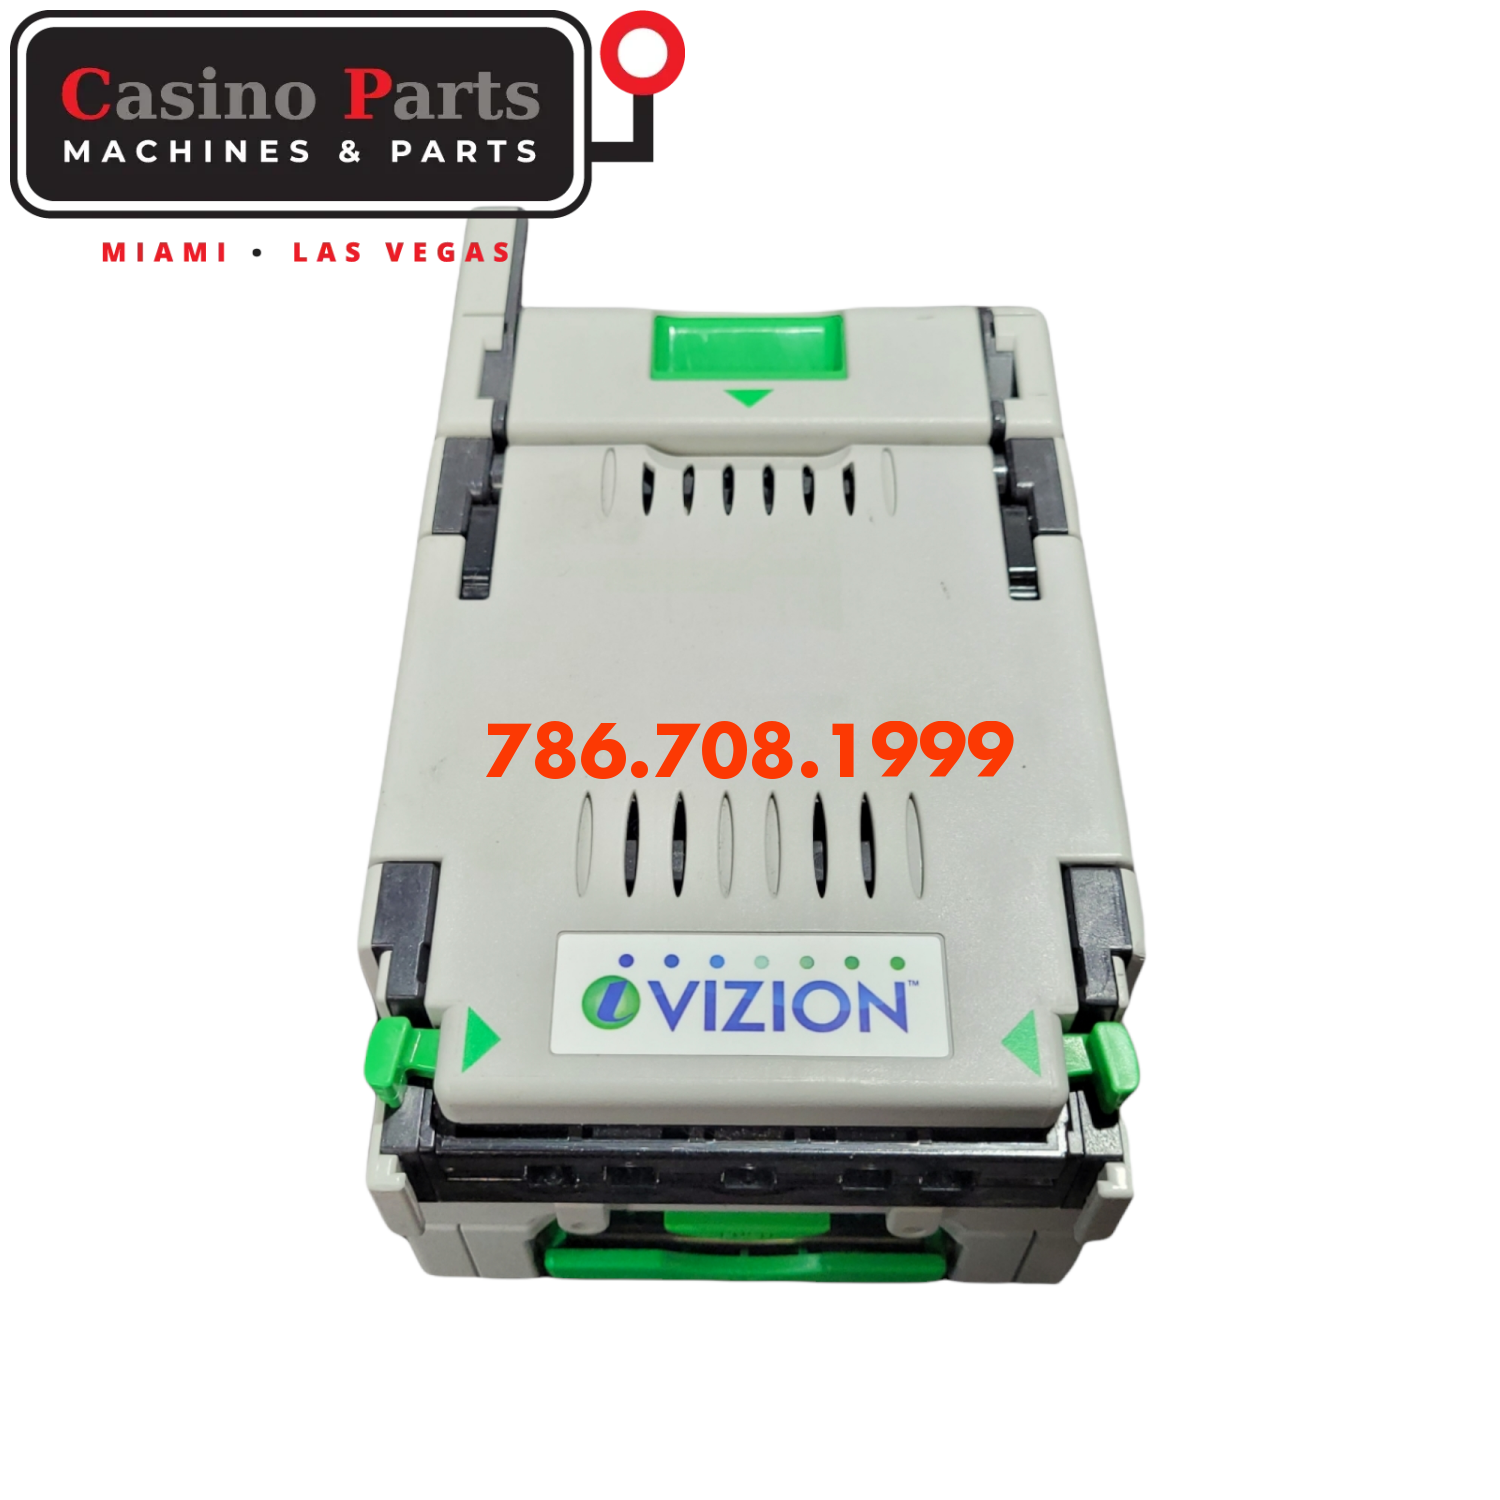 Jcm Ivizion Assembly Bill Validator For Any Currency Validators